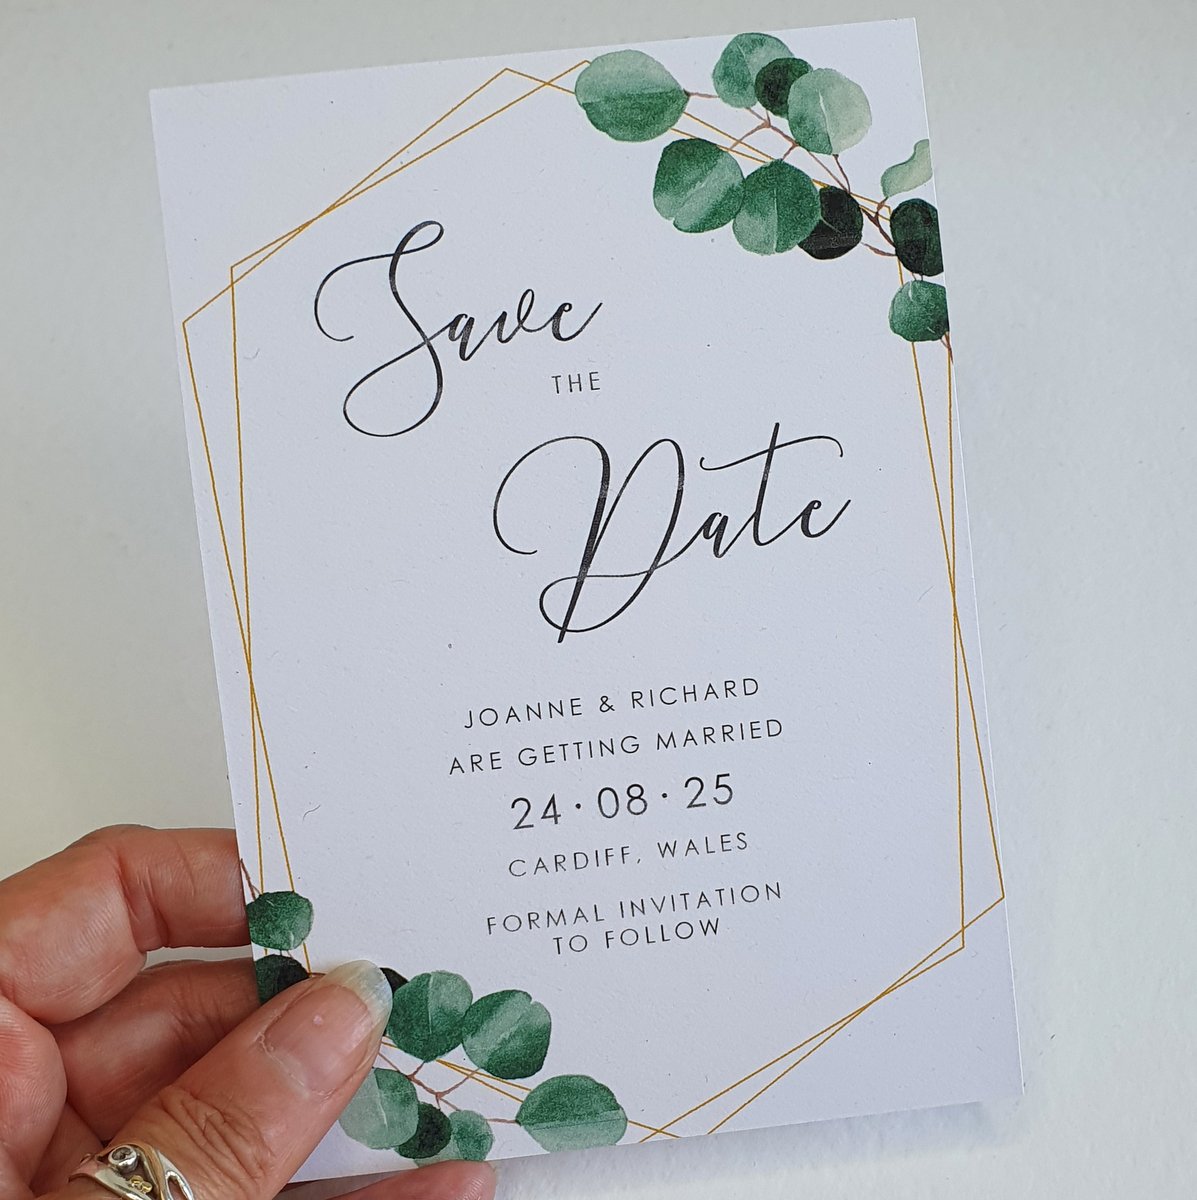 wedding save the date cards with a eucalyptus design on the corners